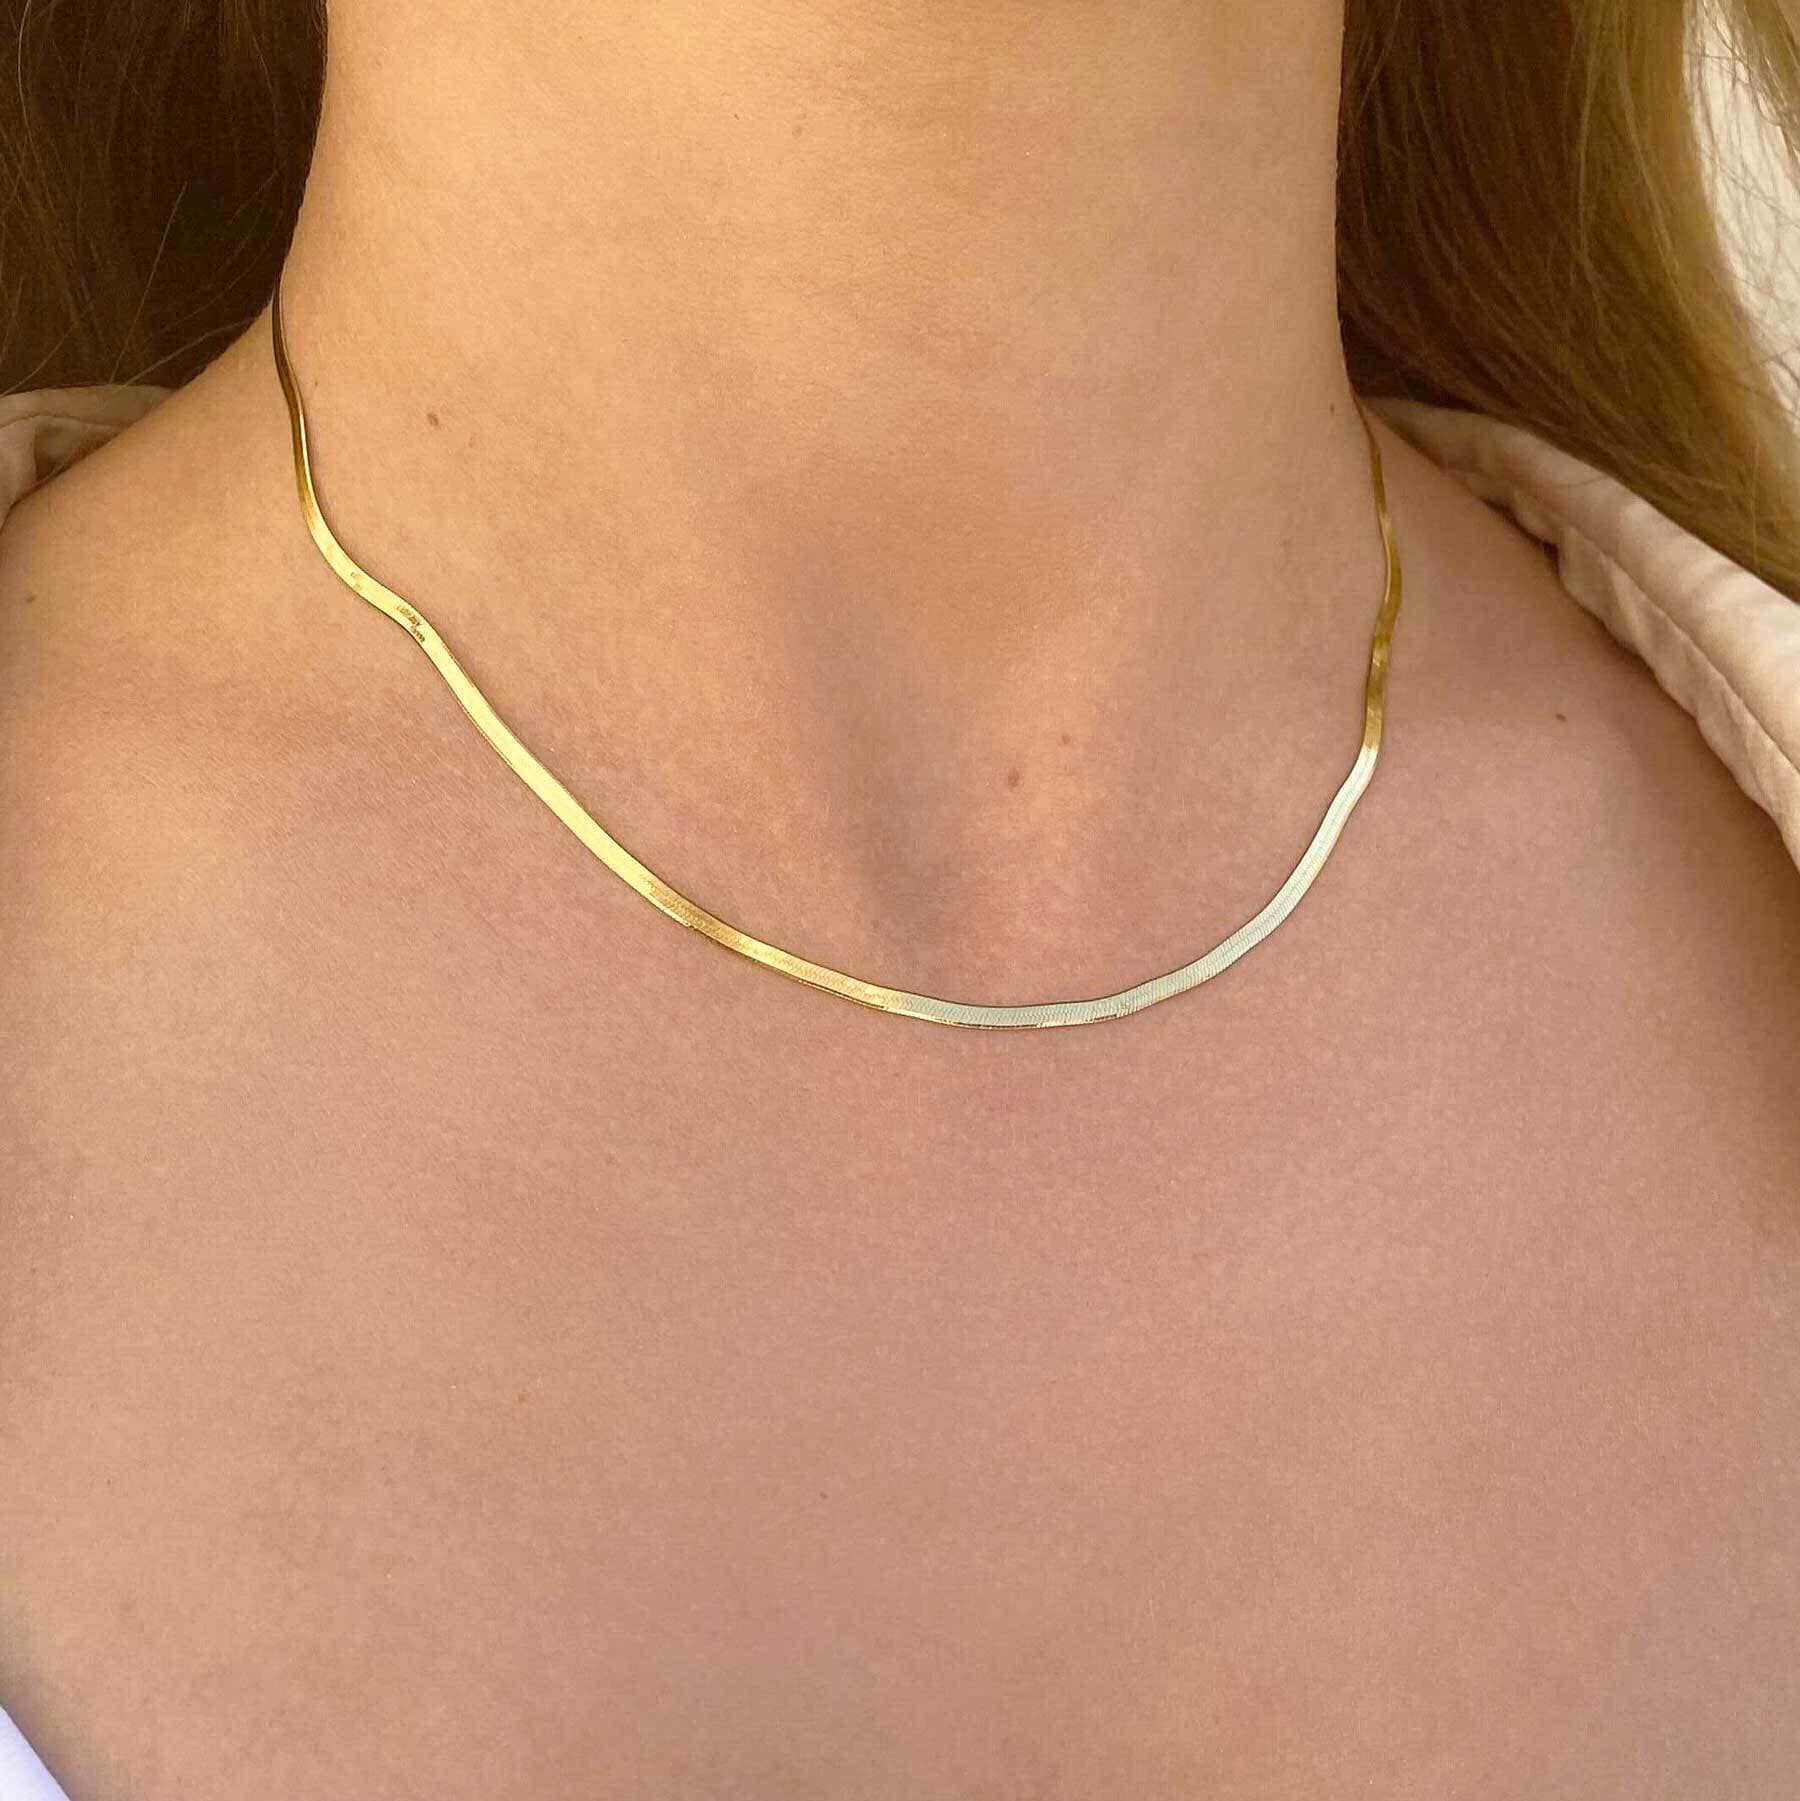 Snake Chain Necklace - Herringbone Necklace